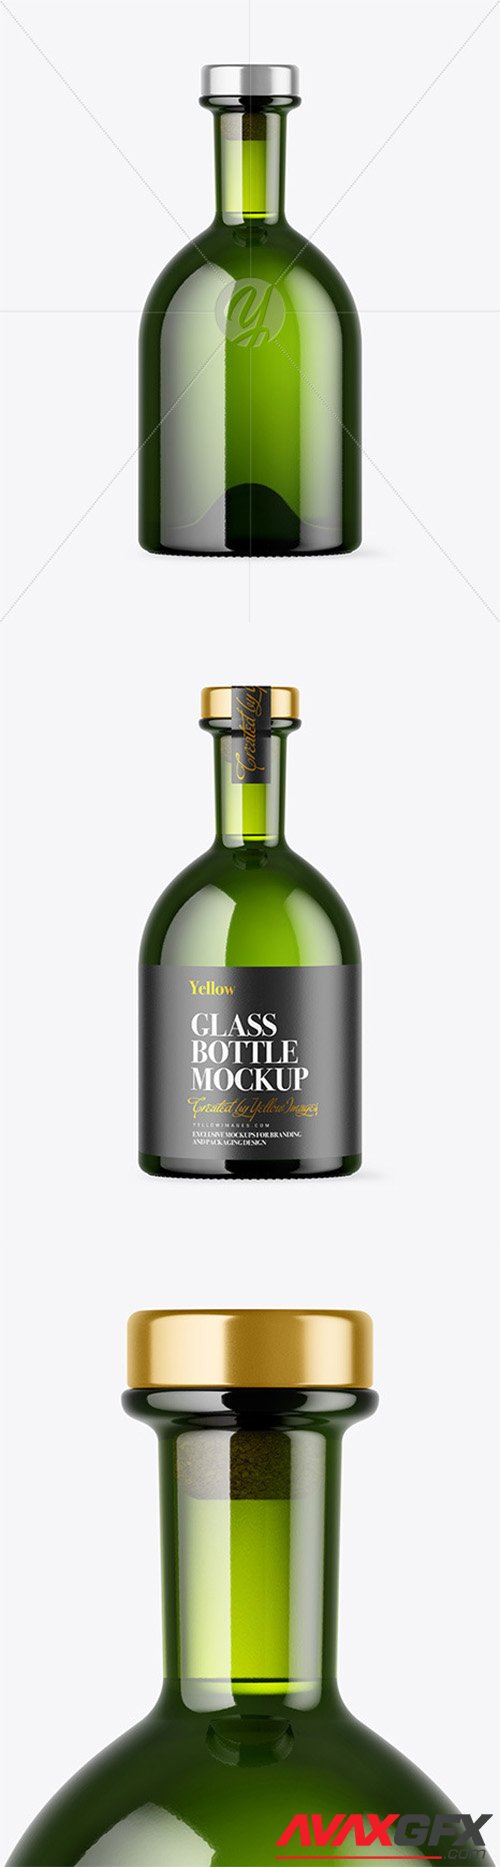 Green Glass Bottle with Wooden Cap Mockup 79679 TIF